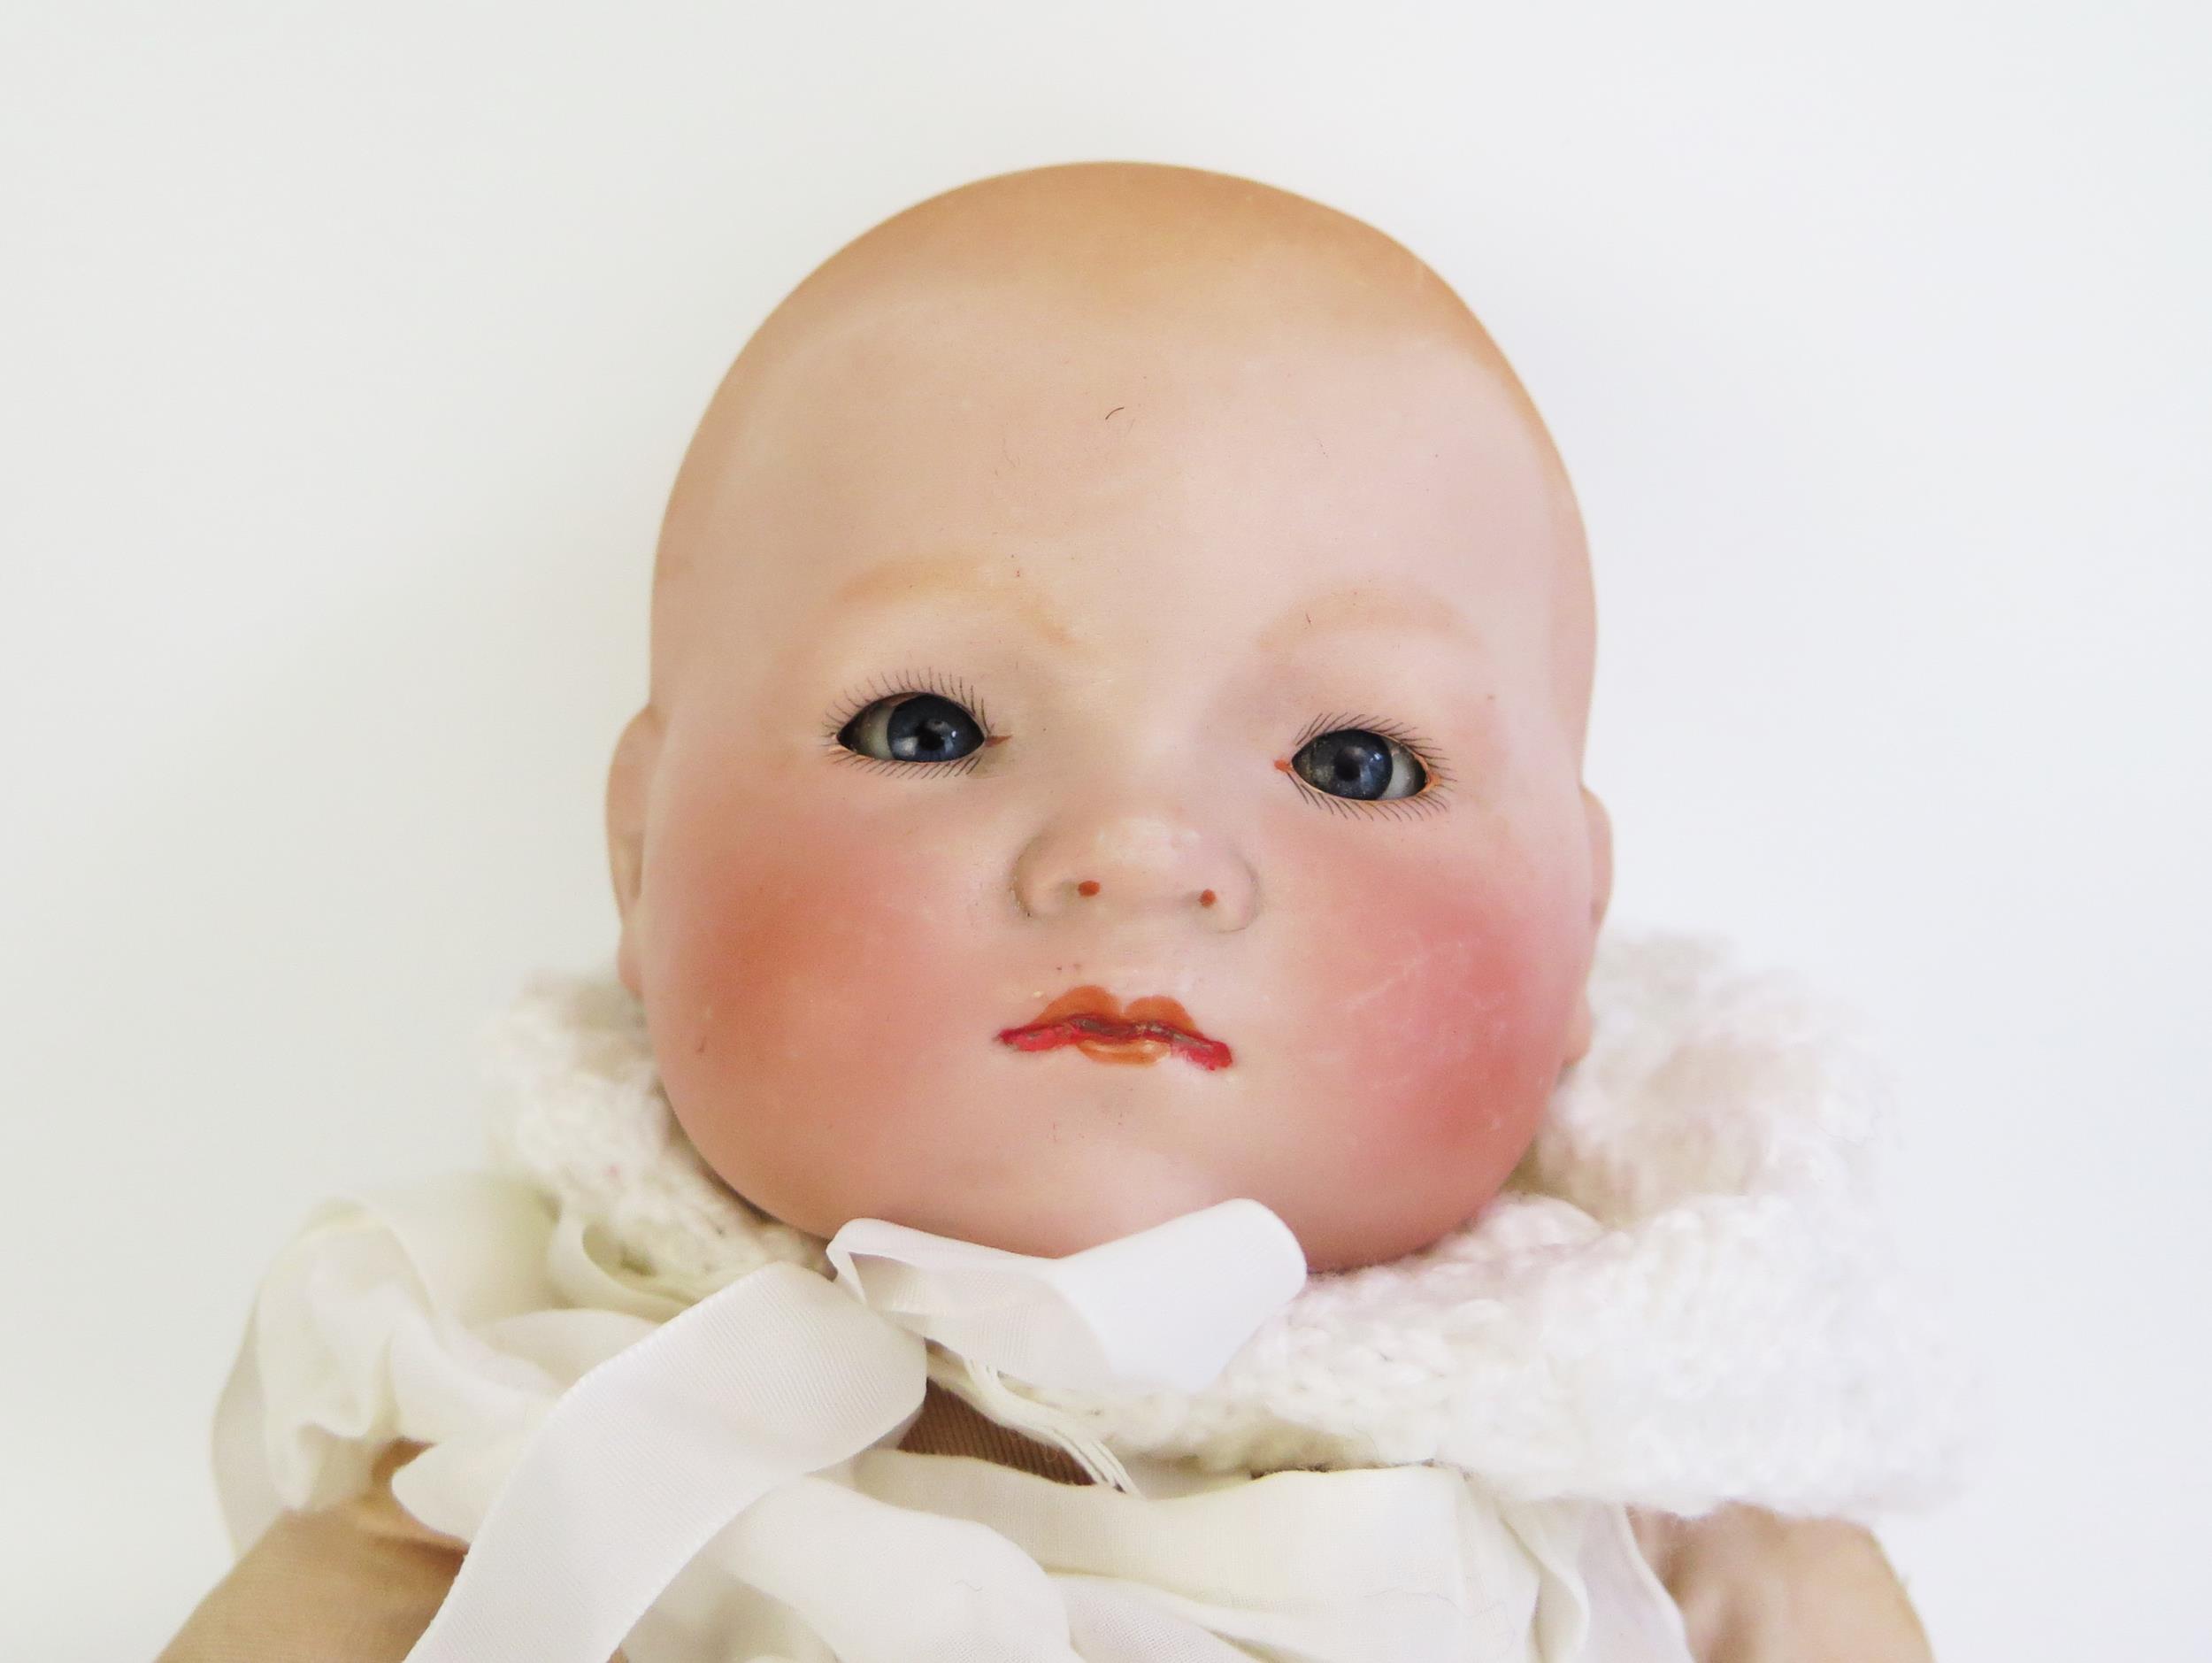 Armand Marseille Bisque Headed Baby Doll (35cm) a/f - Image 2 of 3